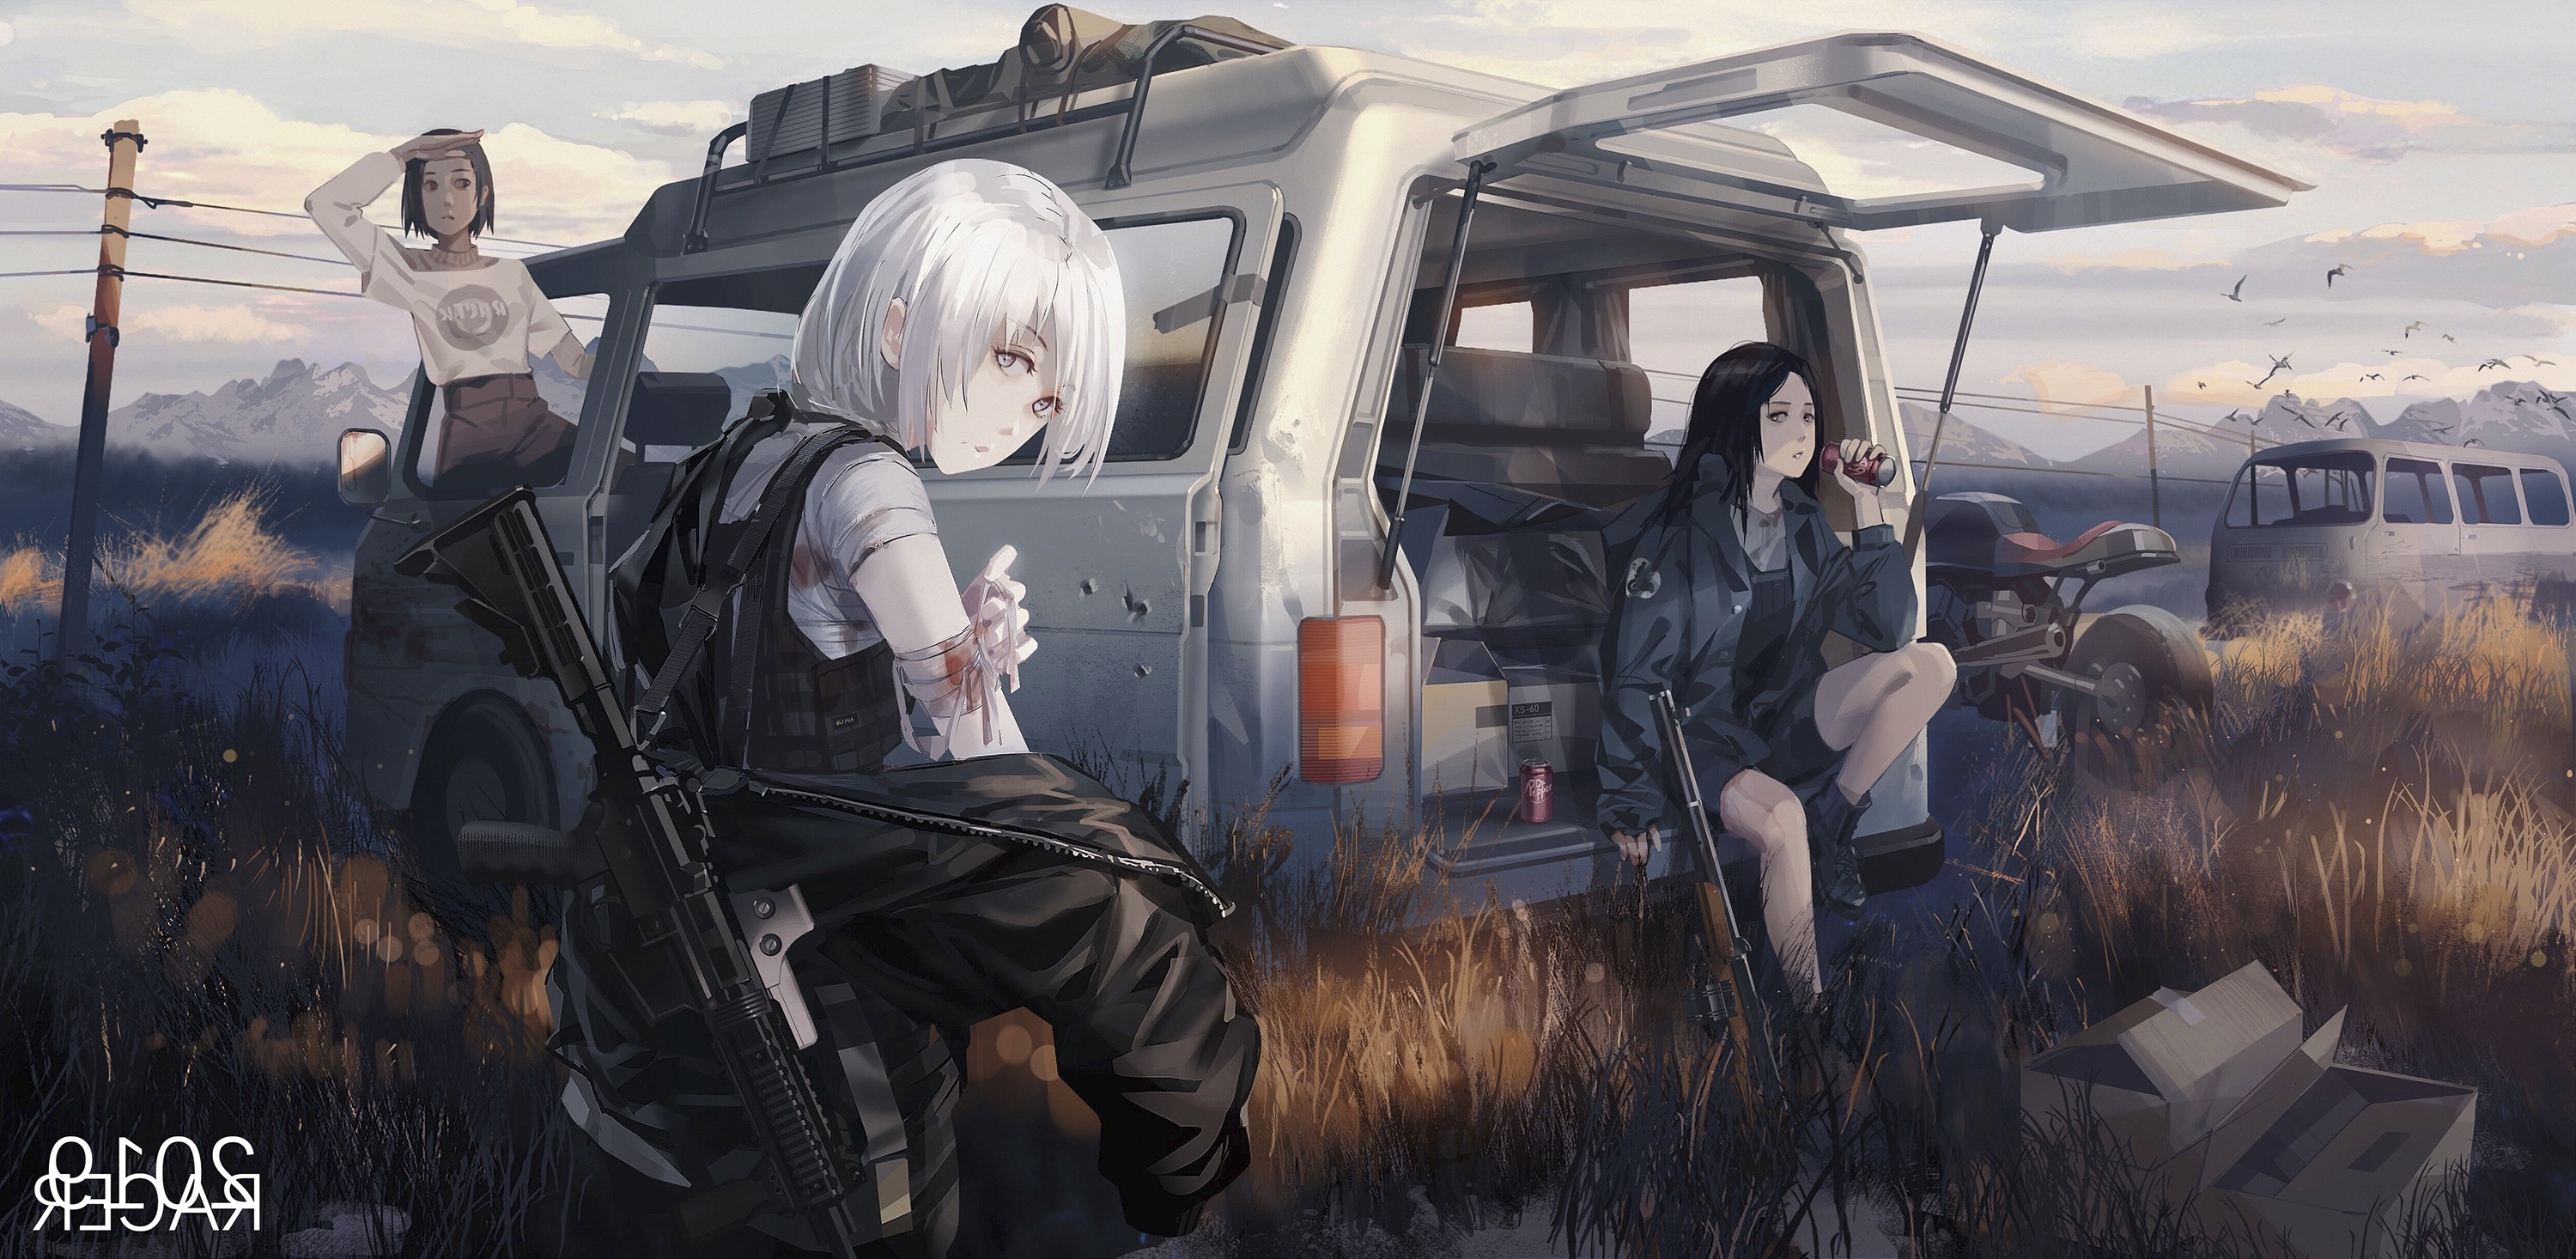 so post apocalypse anime featuring her as the main character when? |  Scrolller